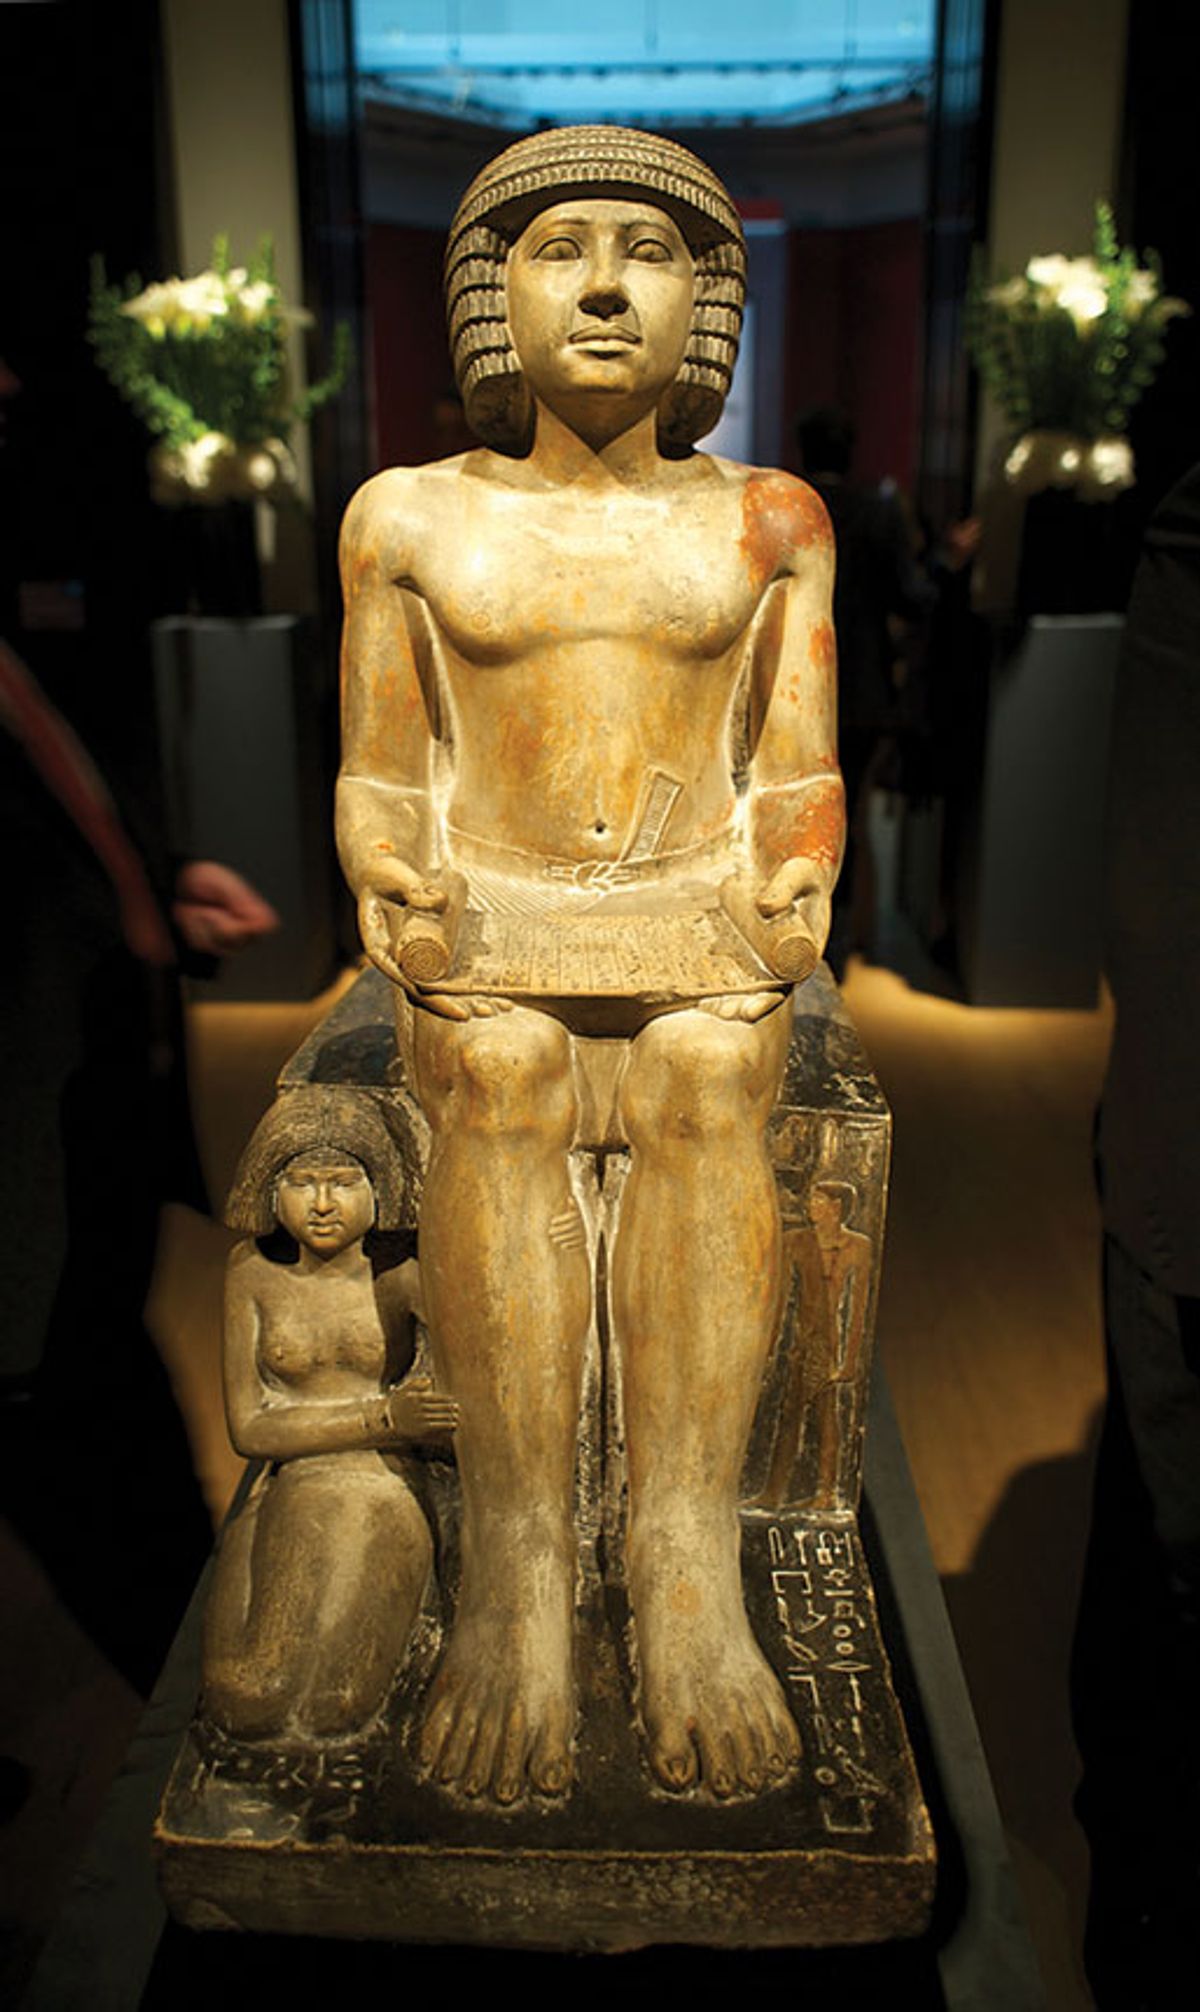 The Northampton Sekhemka was sold at Christie’s in July 2014 to an anonymous buyer for £15.8m Photo: © Mike Pitts